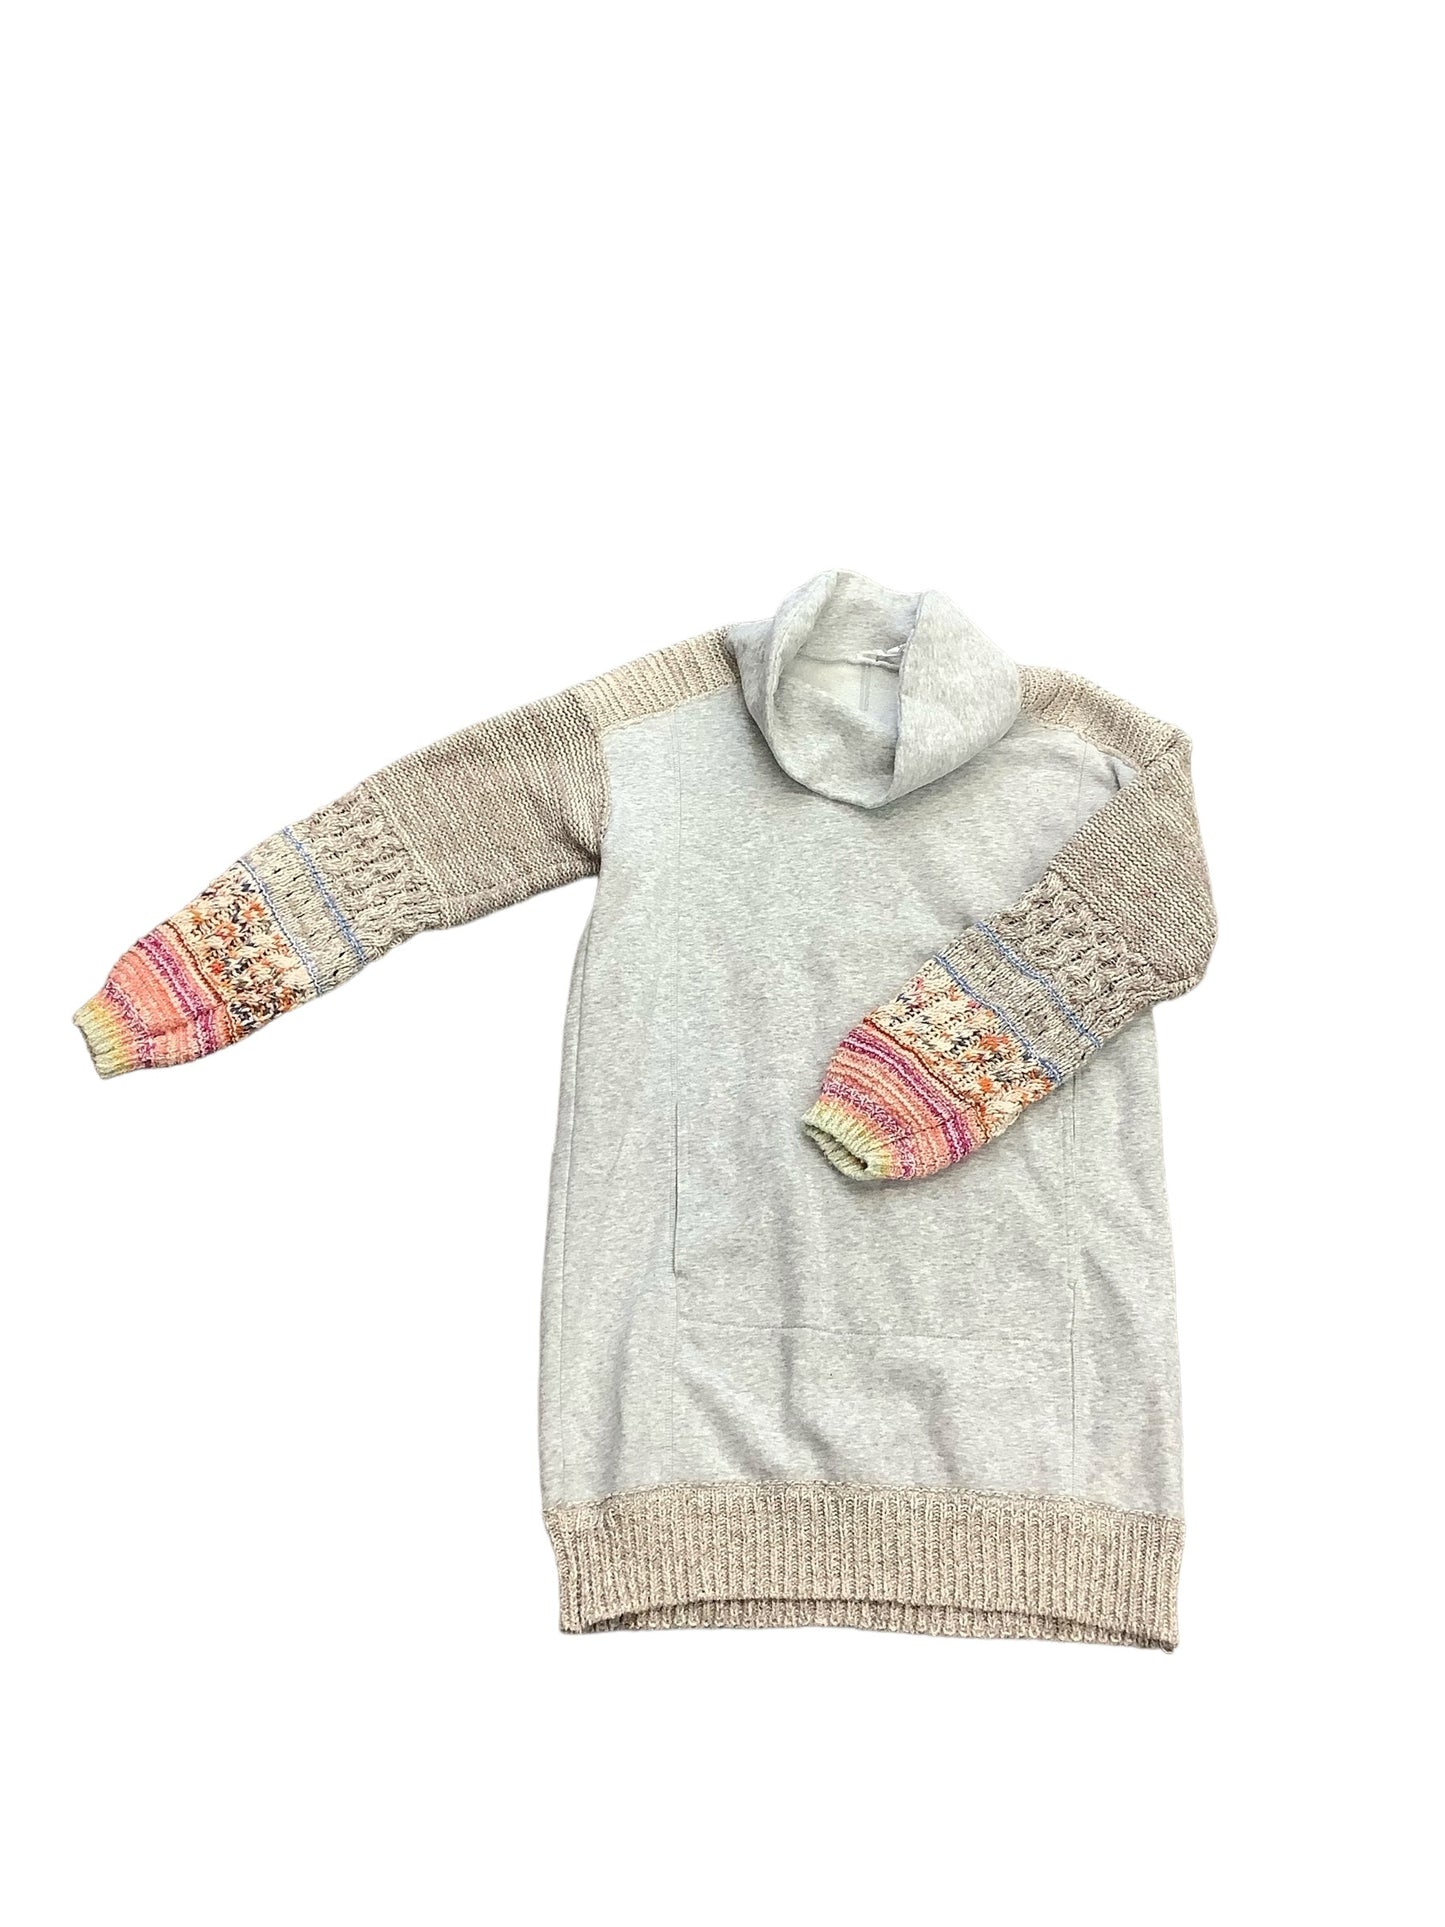 Sweater By Daily Practice By Anthropologie  Size: S